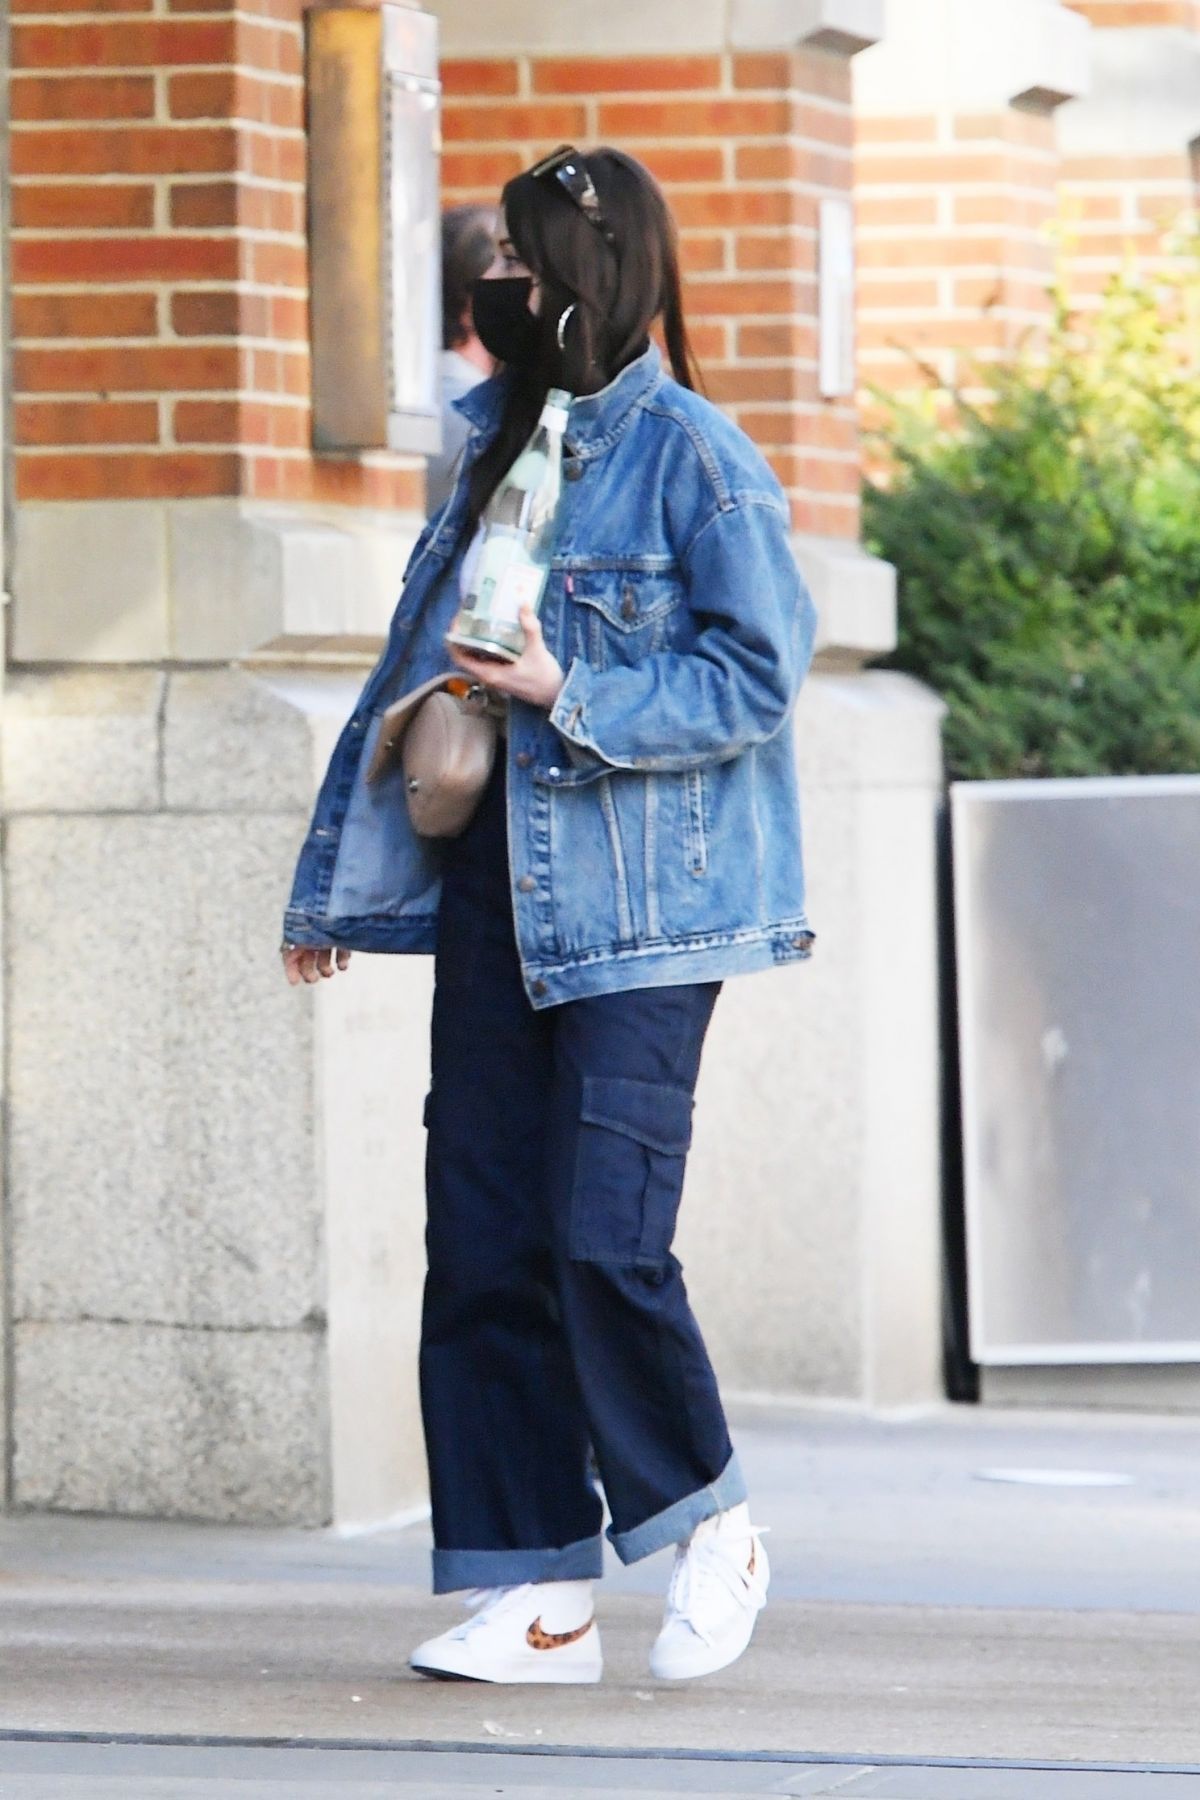 kacey-musgraves-in-double-denim-out-in-new-york-03-25-2021-1.jpg